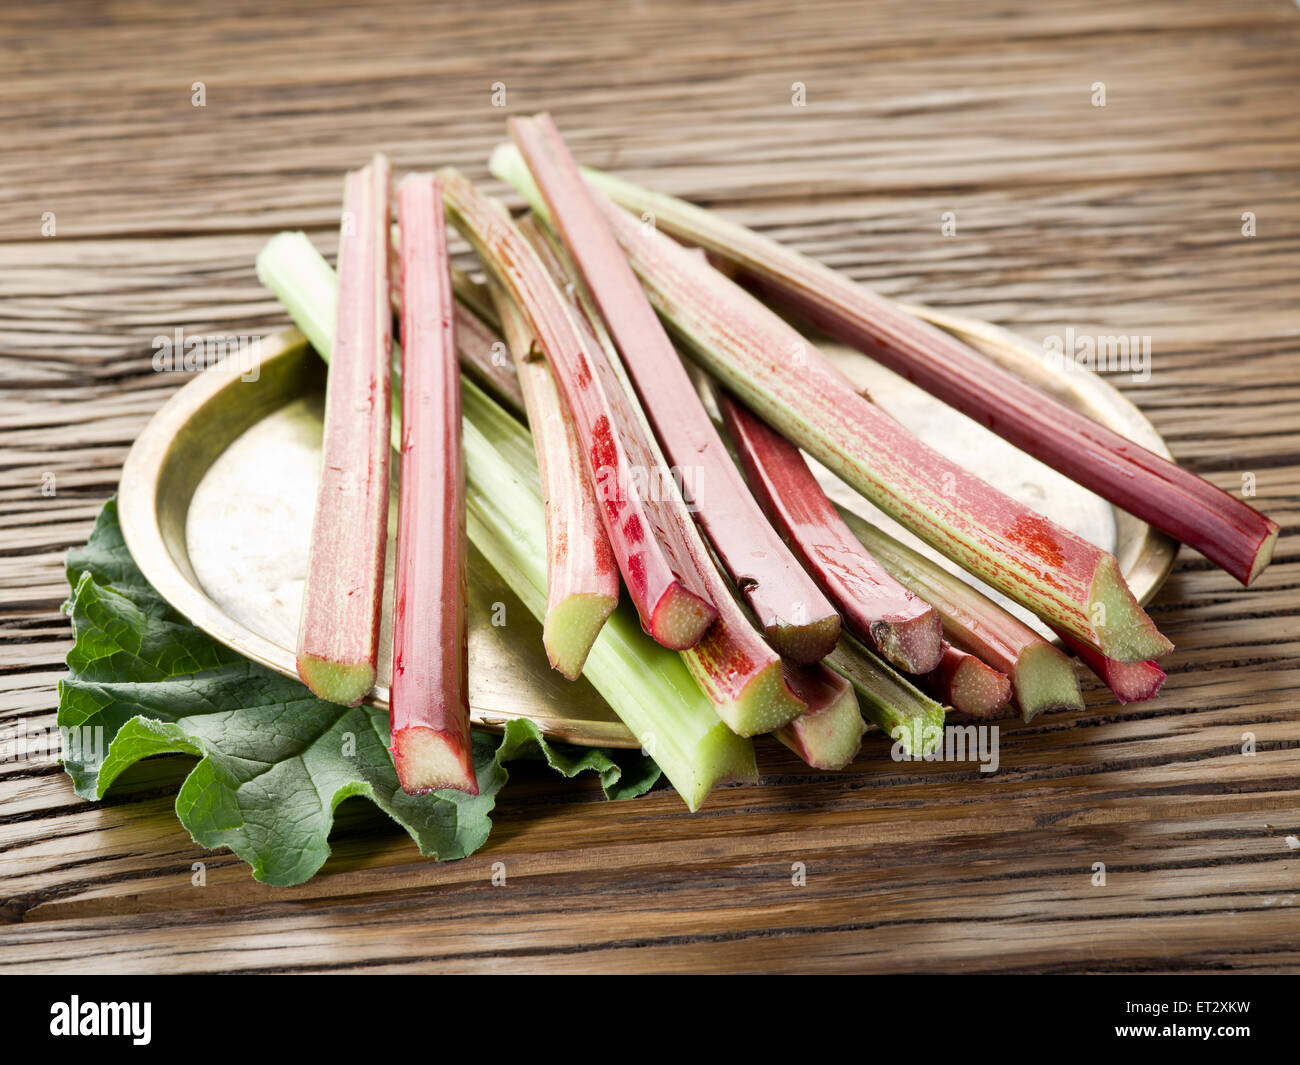 Rhubarb stalks on the wooden table. Stock Photo